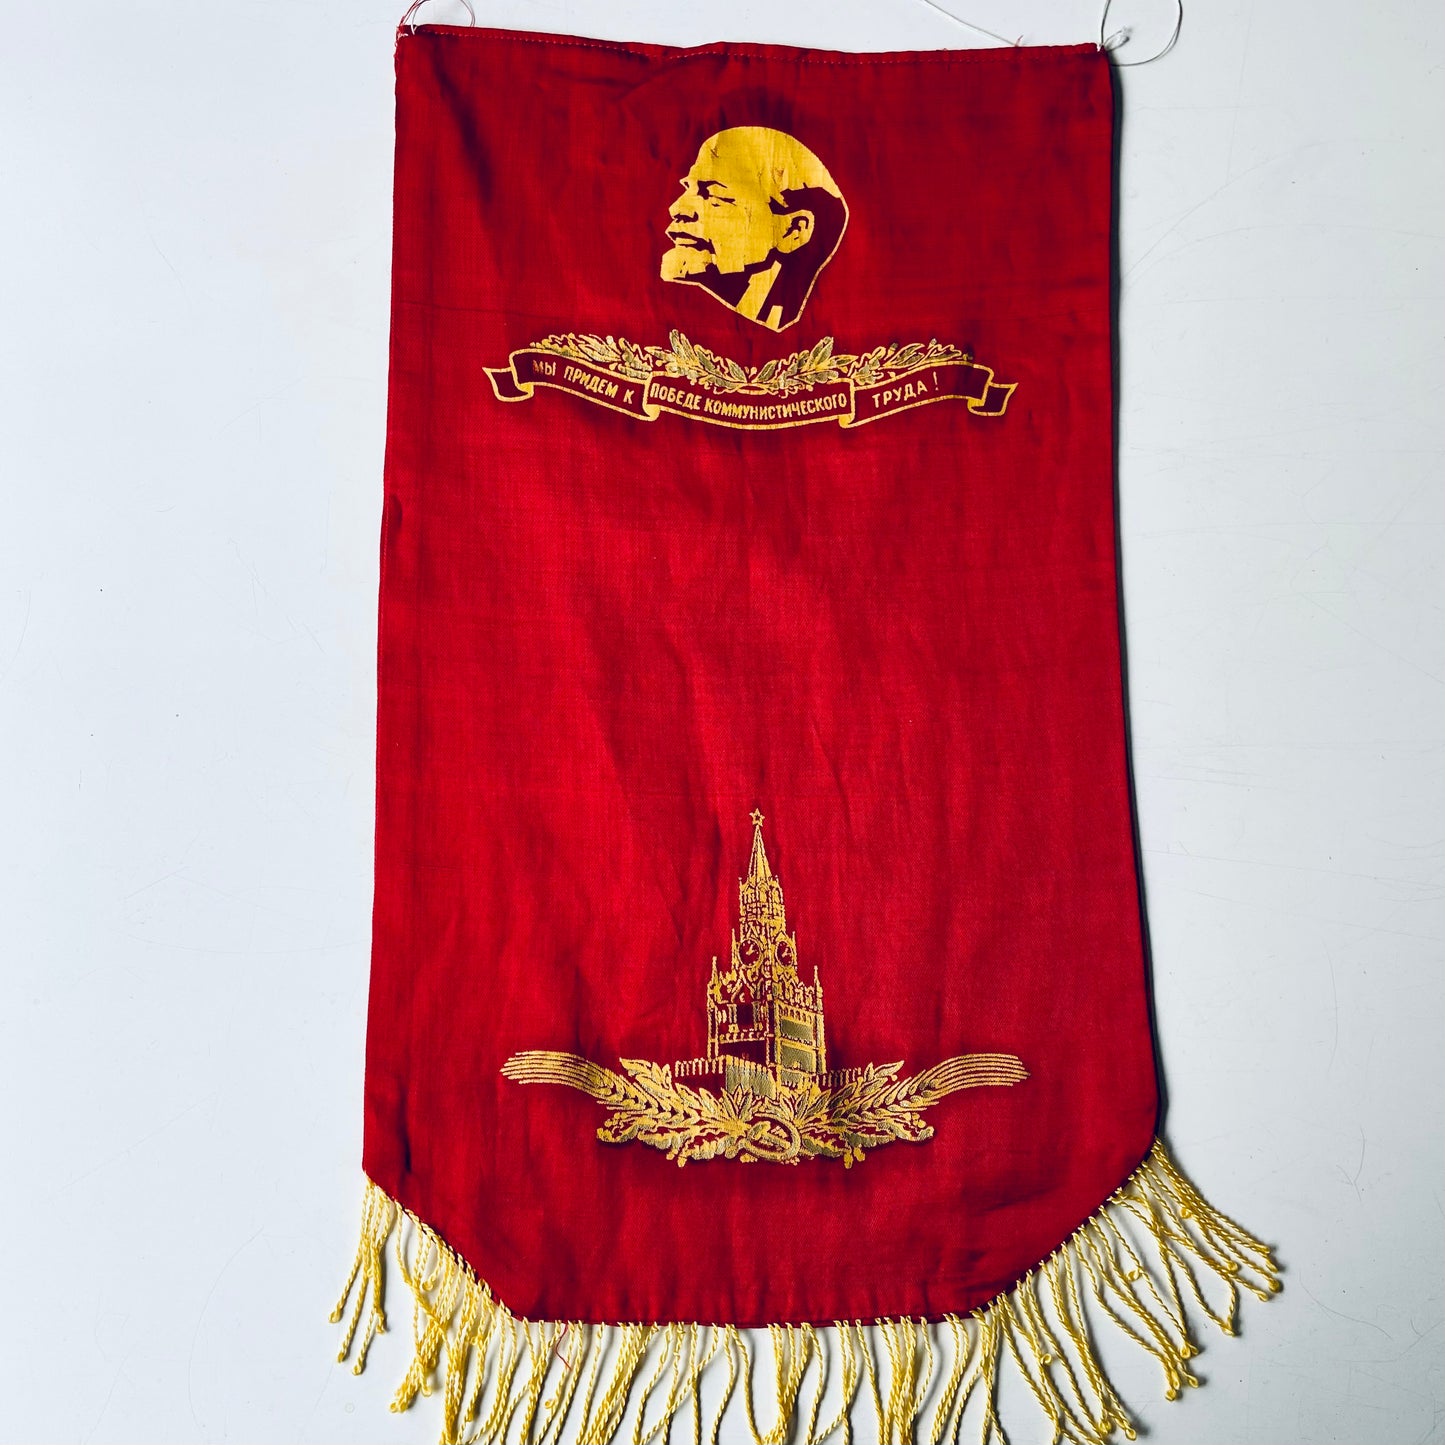 Pennant, "We will come to the victory of Communist labor", USSR, 1970s